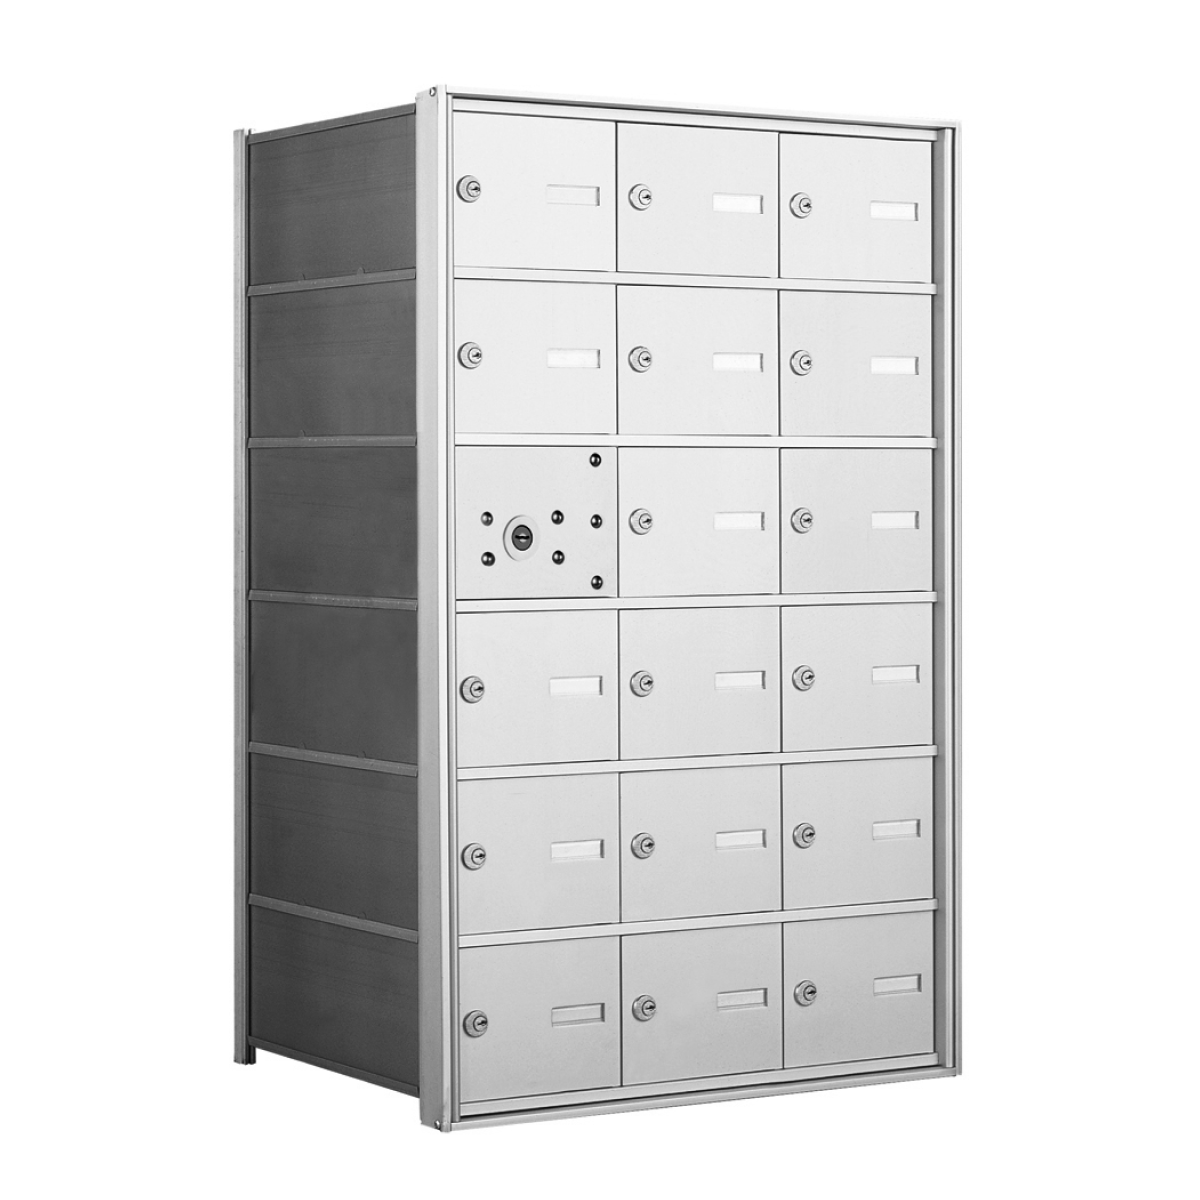 1400 Series Front-Loading Horizontal Mailboxes in Anodized Aluminum Finish – 17 Tenant Doors And 1 USPS Master Door Product Image